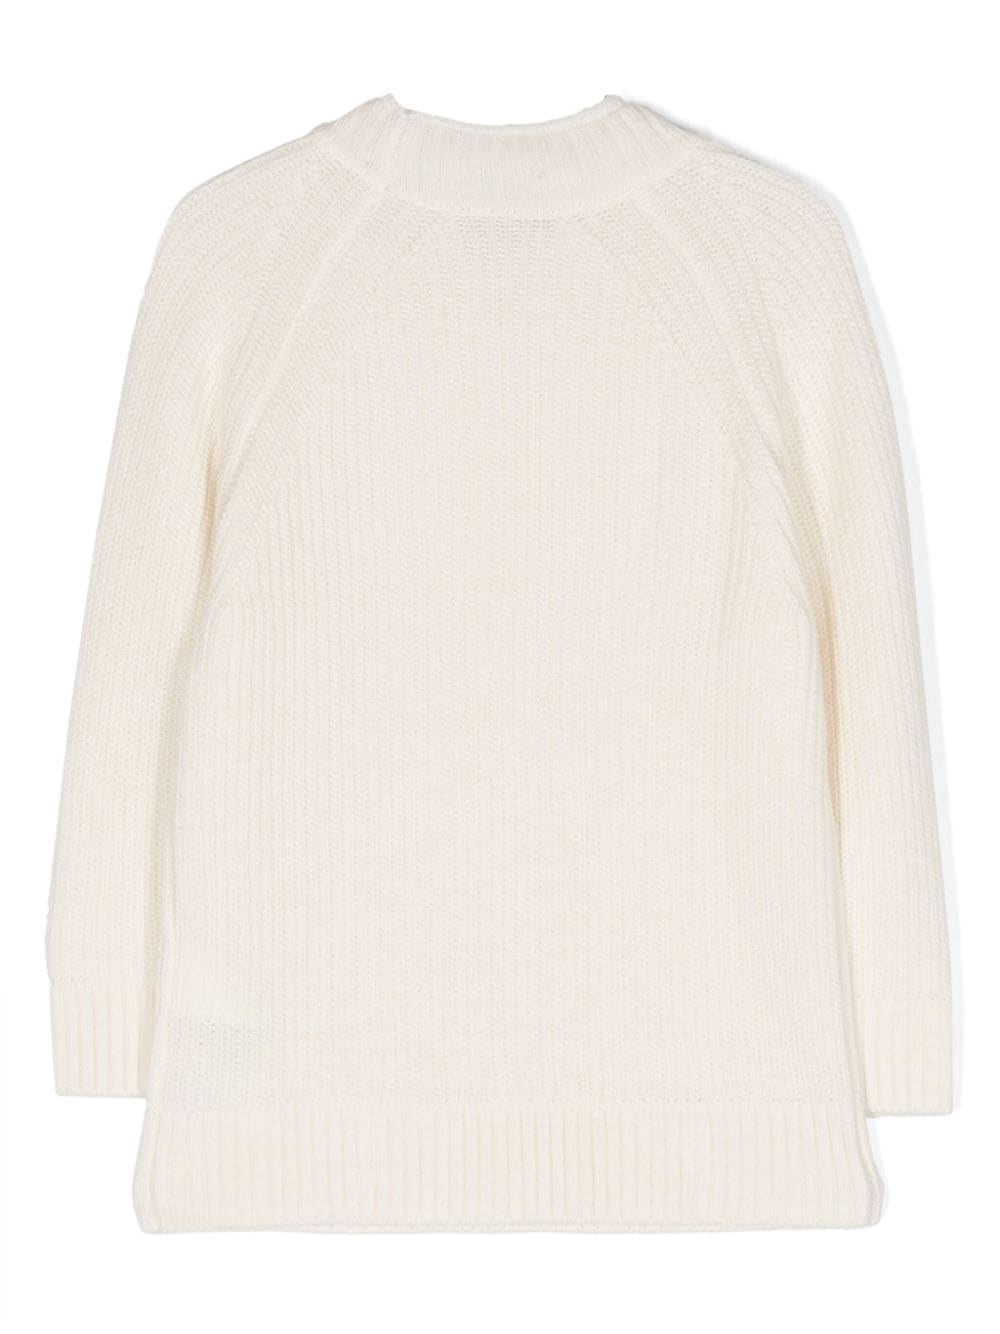 Image 2 of Paolo Pecora Kids long-sleeved crew-neck jumper